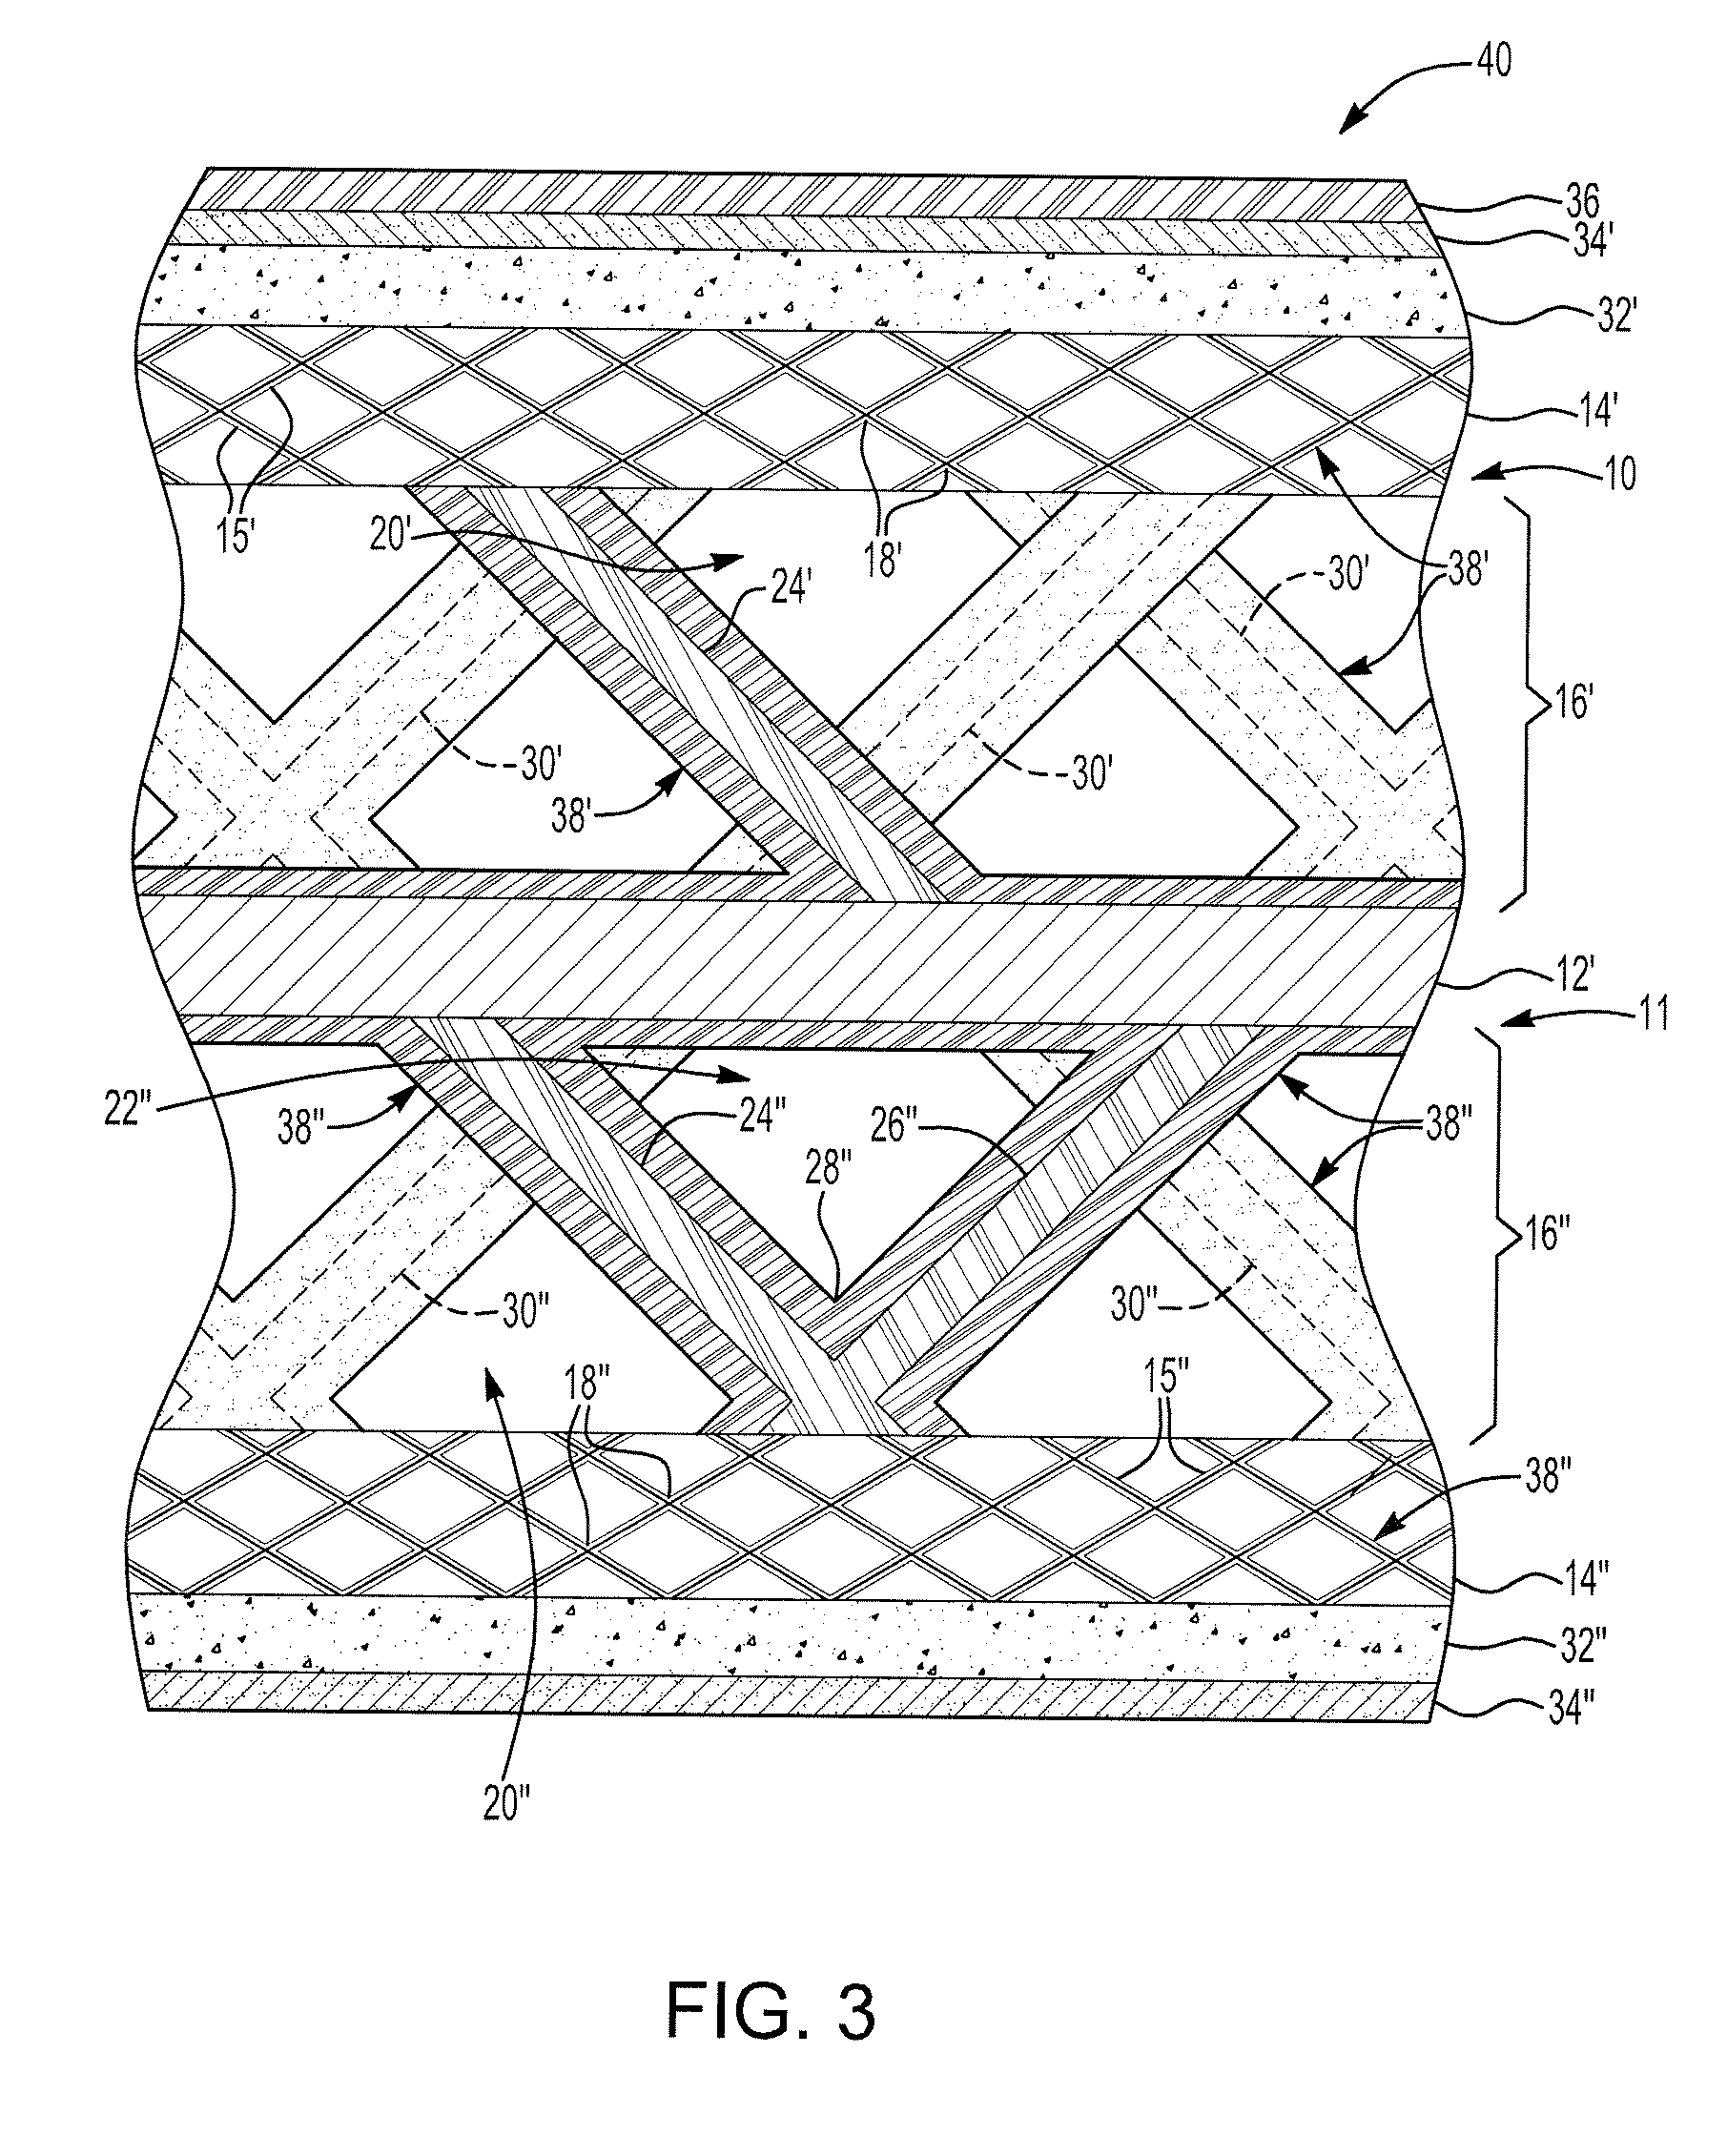 Fuel cell fabrication using photopolymer based processes